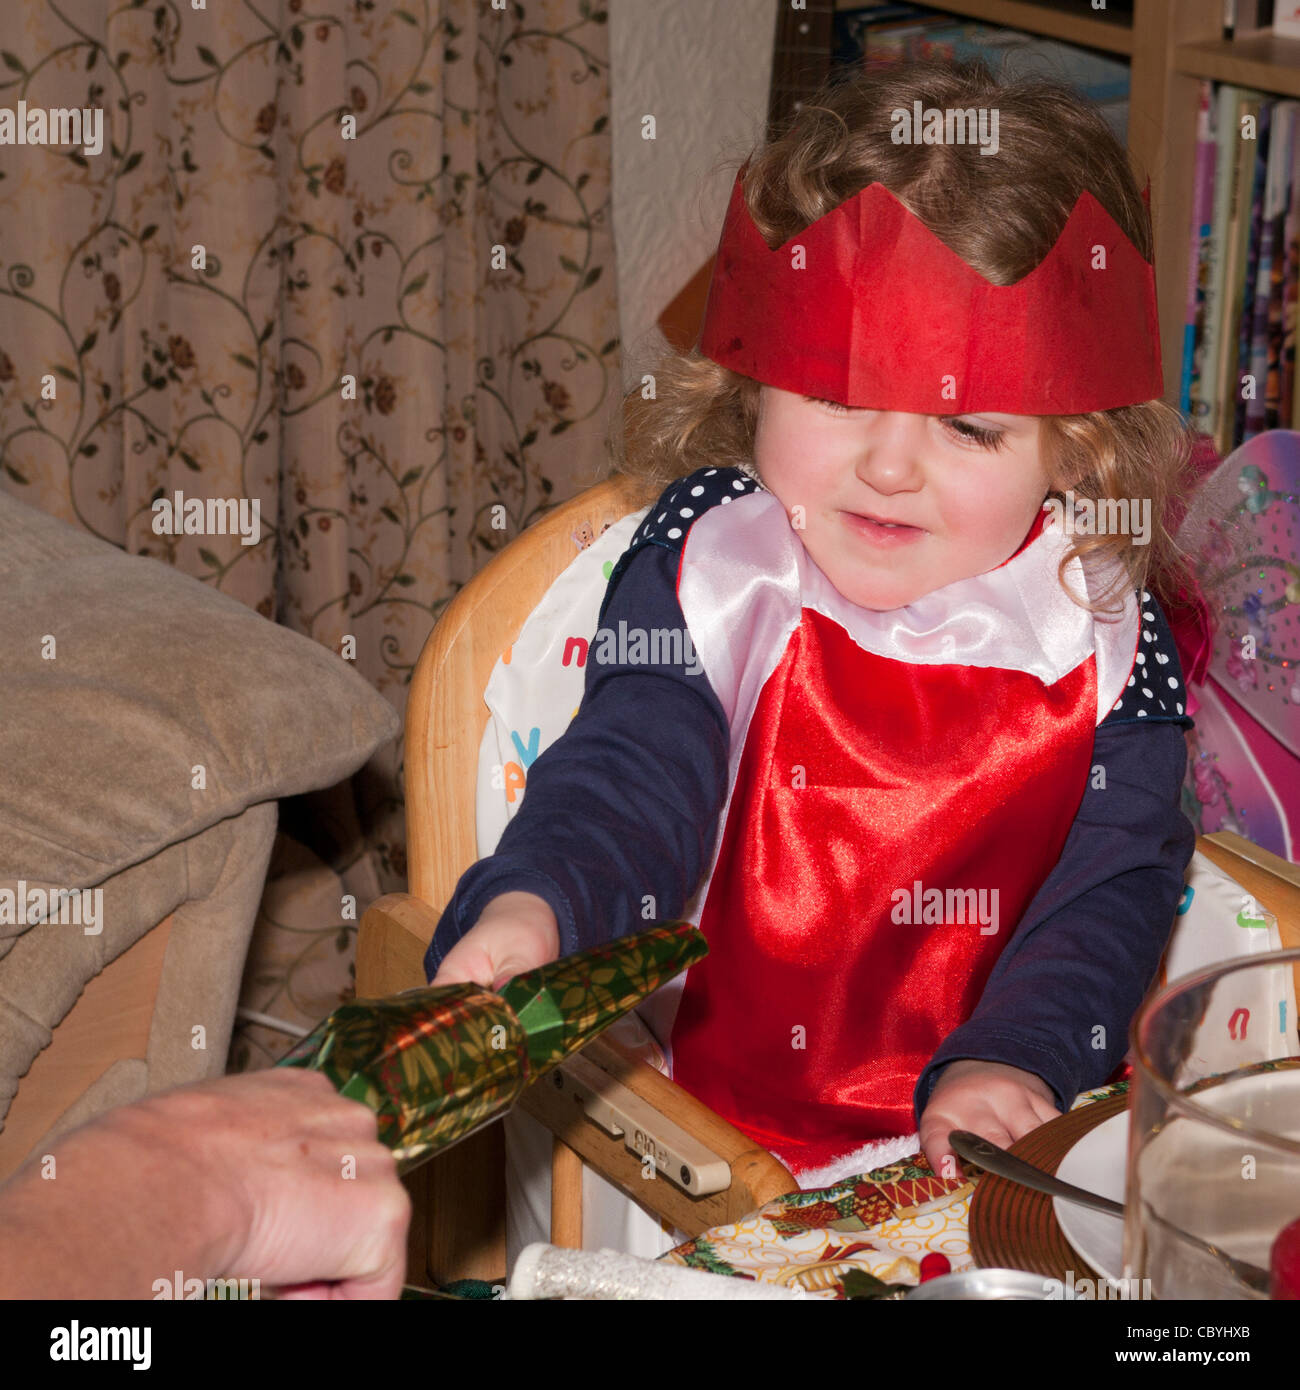 3 Year Old Child Girl Infant Toddler Pulling A Christmas Xmas Cracker Stock Photo